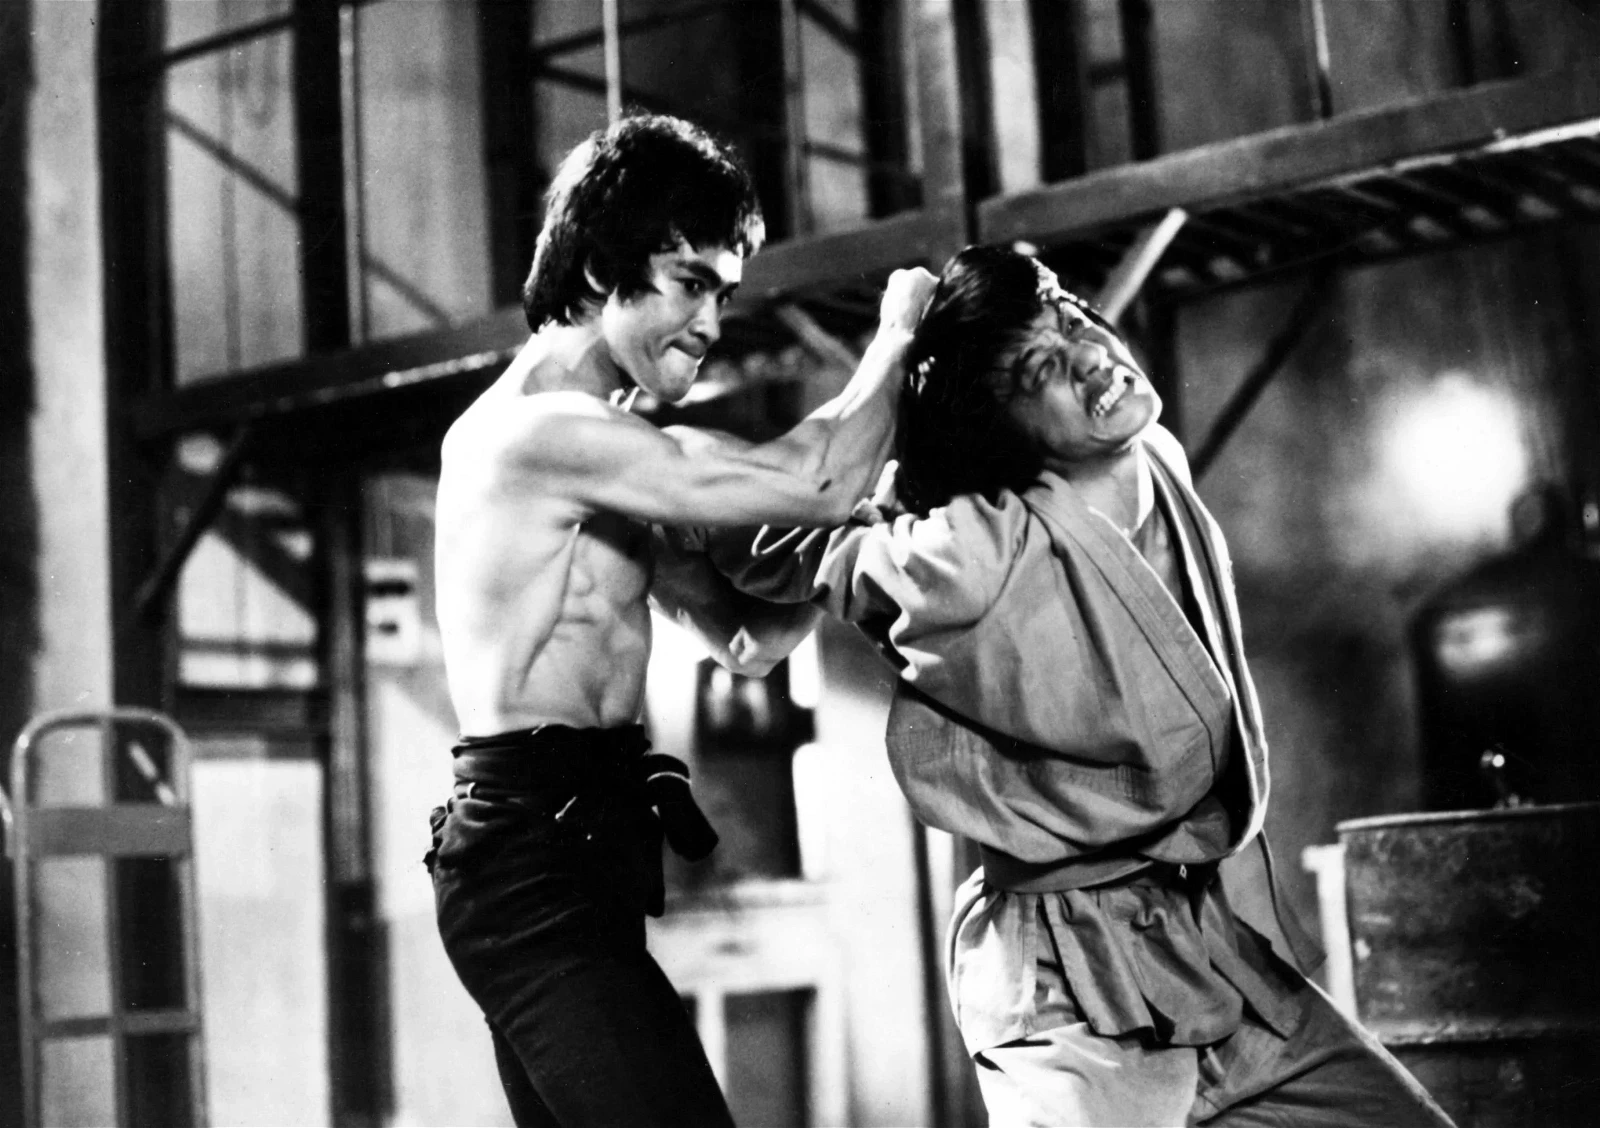 Jackie Chan and the late Bruce Lee in a still from Enter the Dragon (1973)